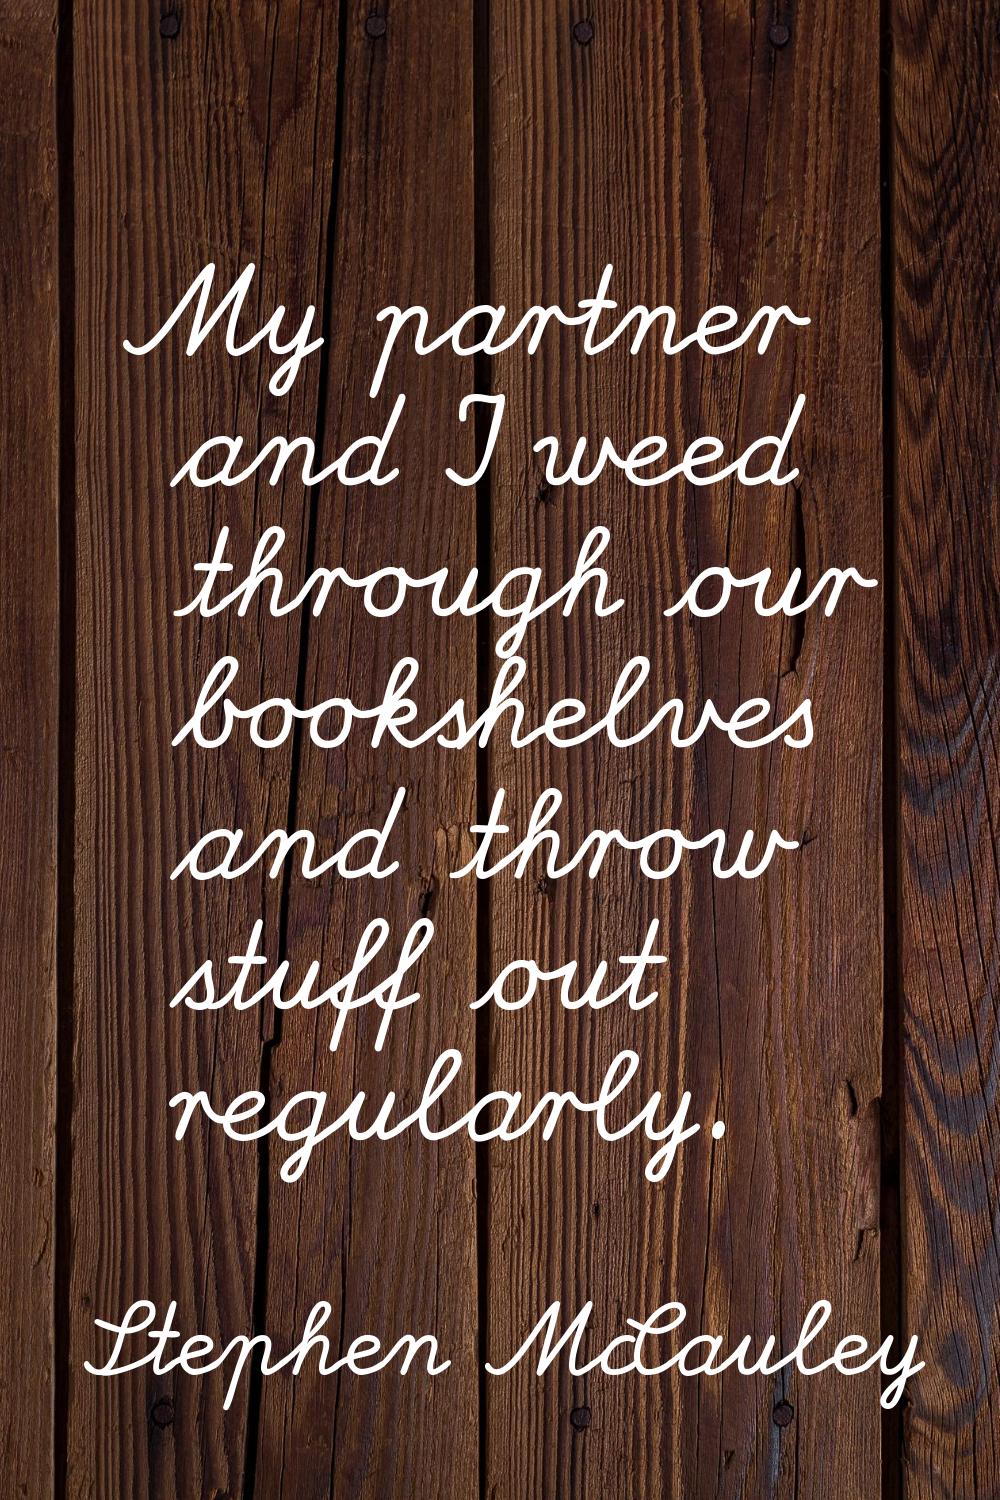 My partner and I weed through our bookshelves and throw stuff out regularly.